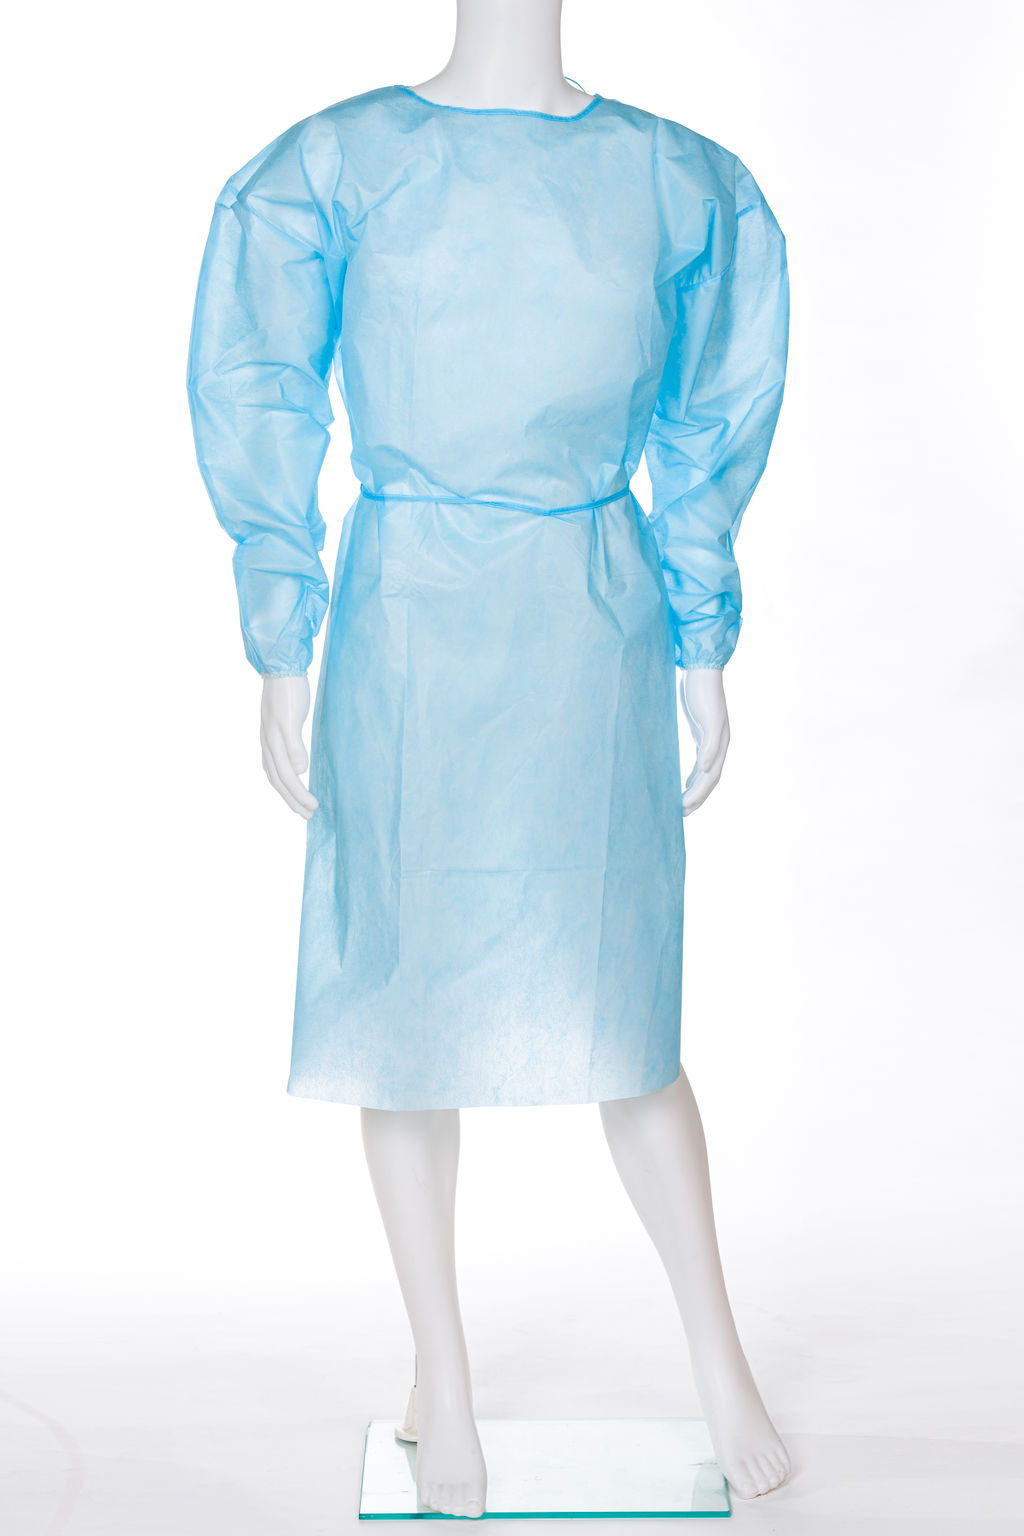 Level 2 Surgical Gowns  NMPL